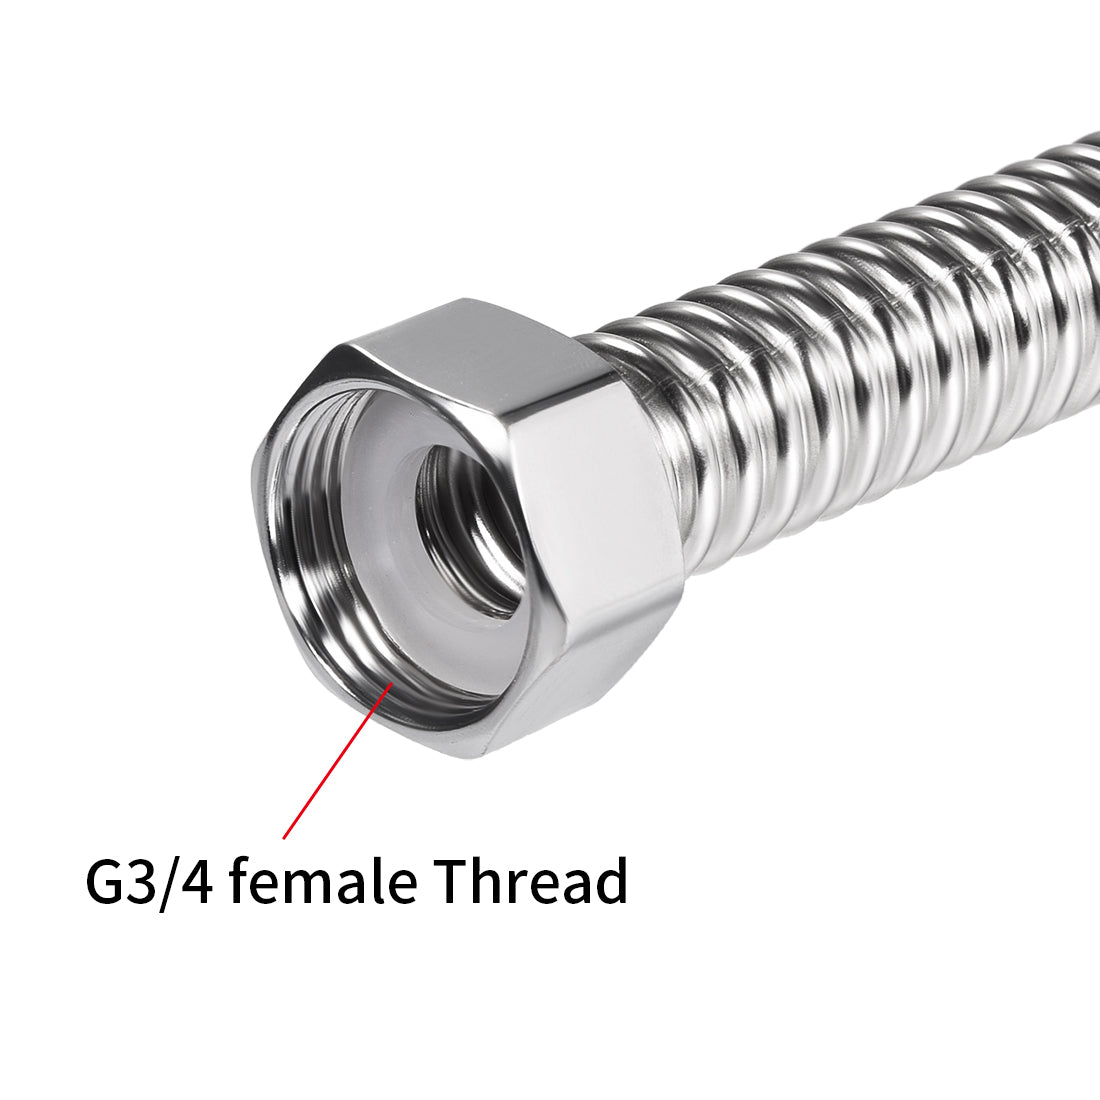 uxcell Uxcell Corrugated Stainless Steel Flexible Water Line 31.5inch Long G3/4 Female Threaded Connector with Washer